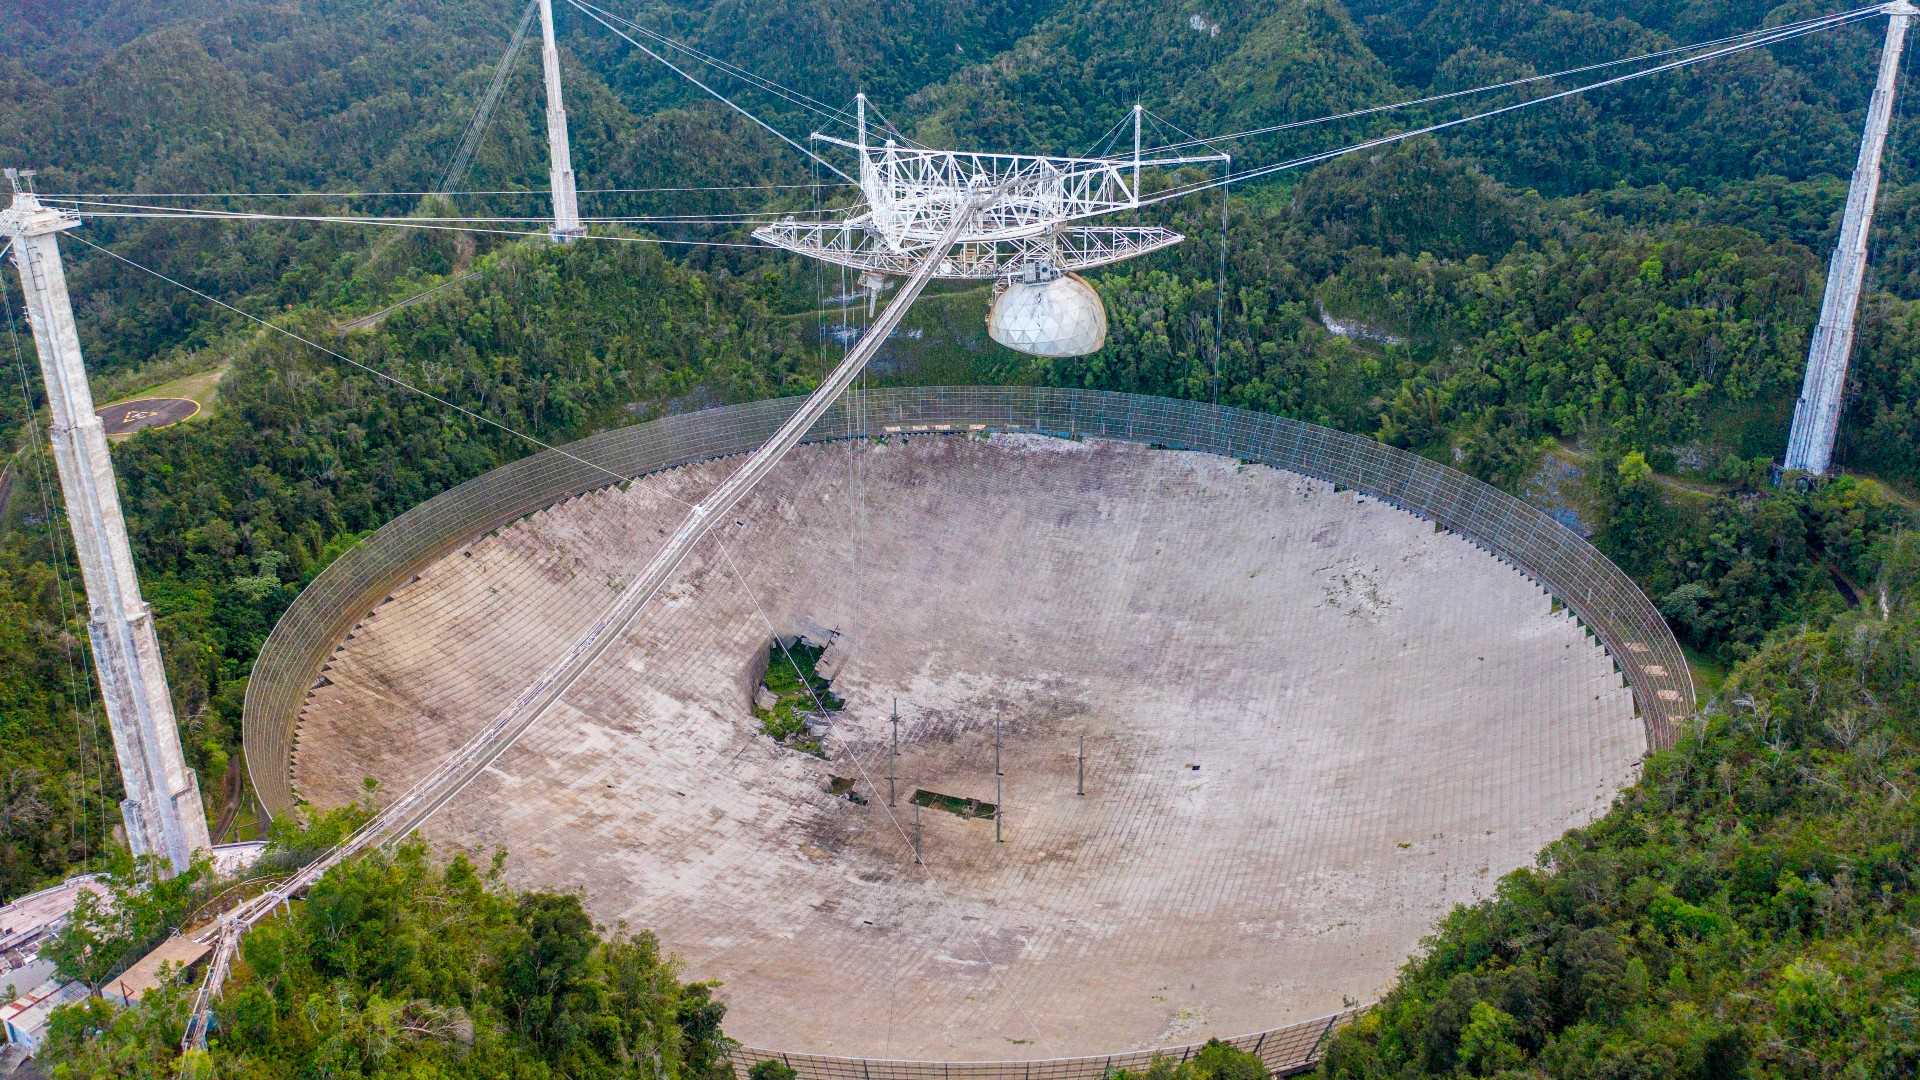 arecibo telescope aerial view showing equipment suspended via cable. damage is visible below